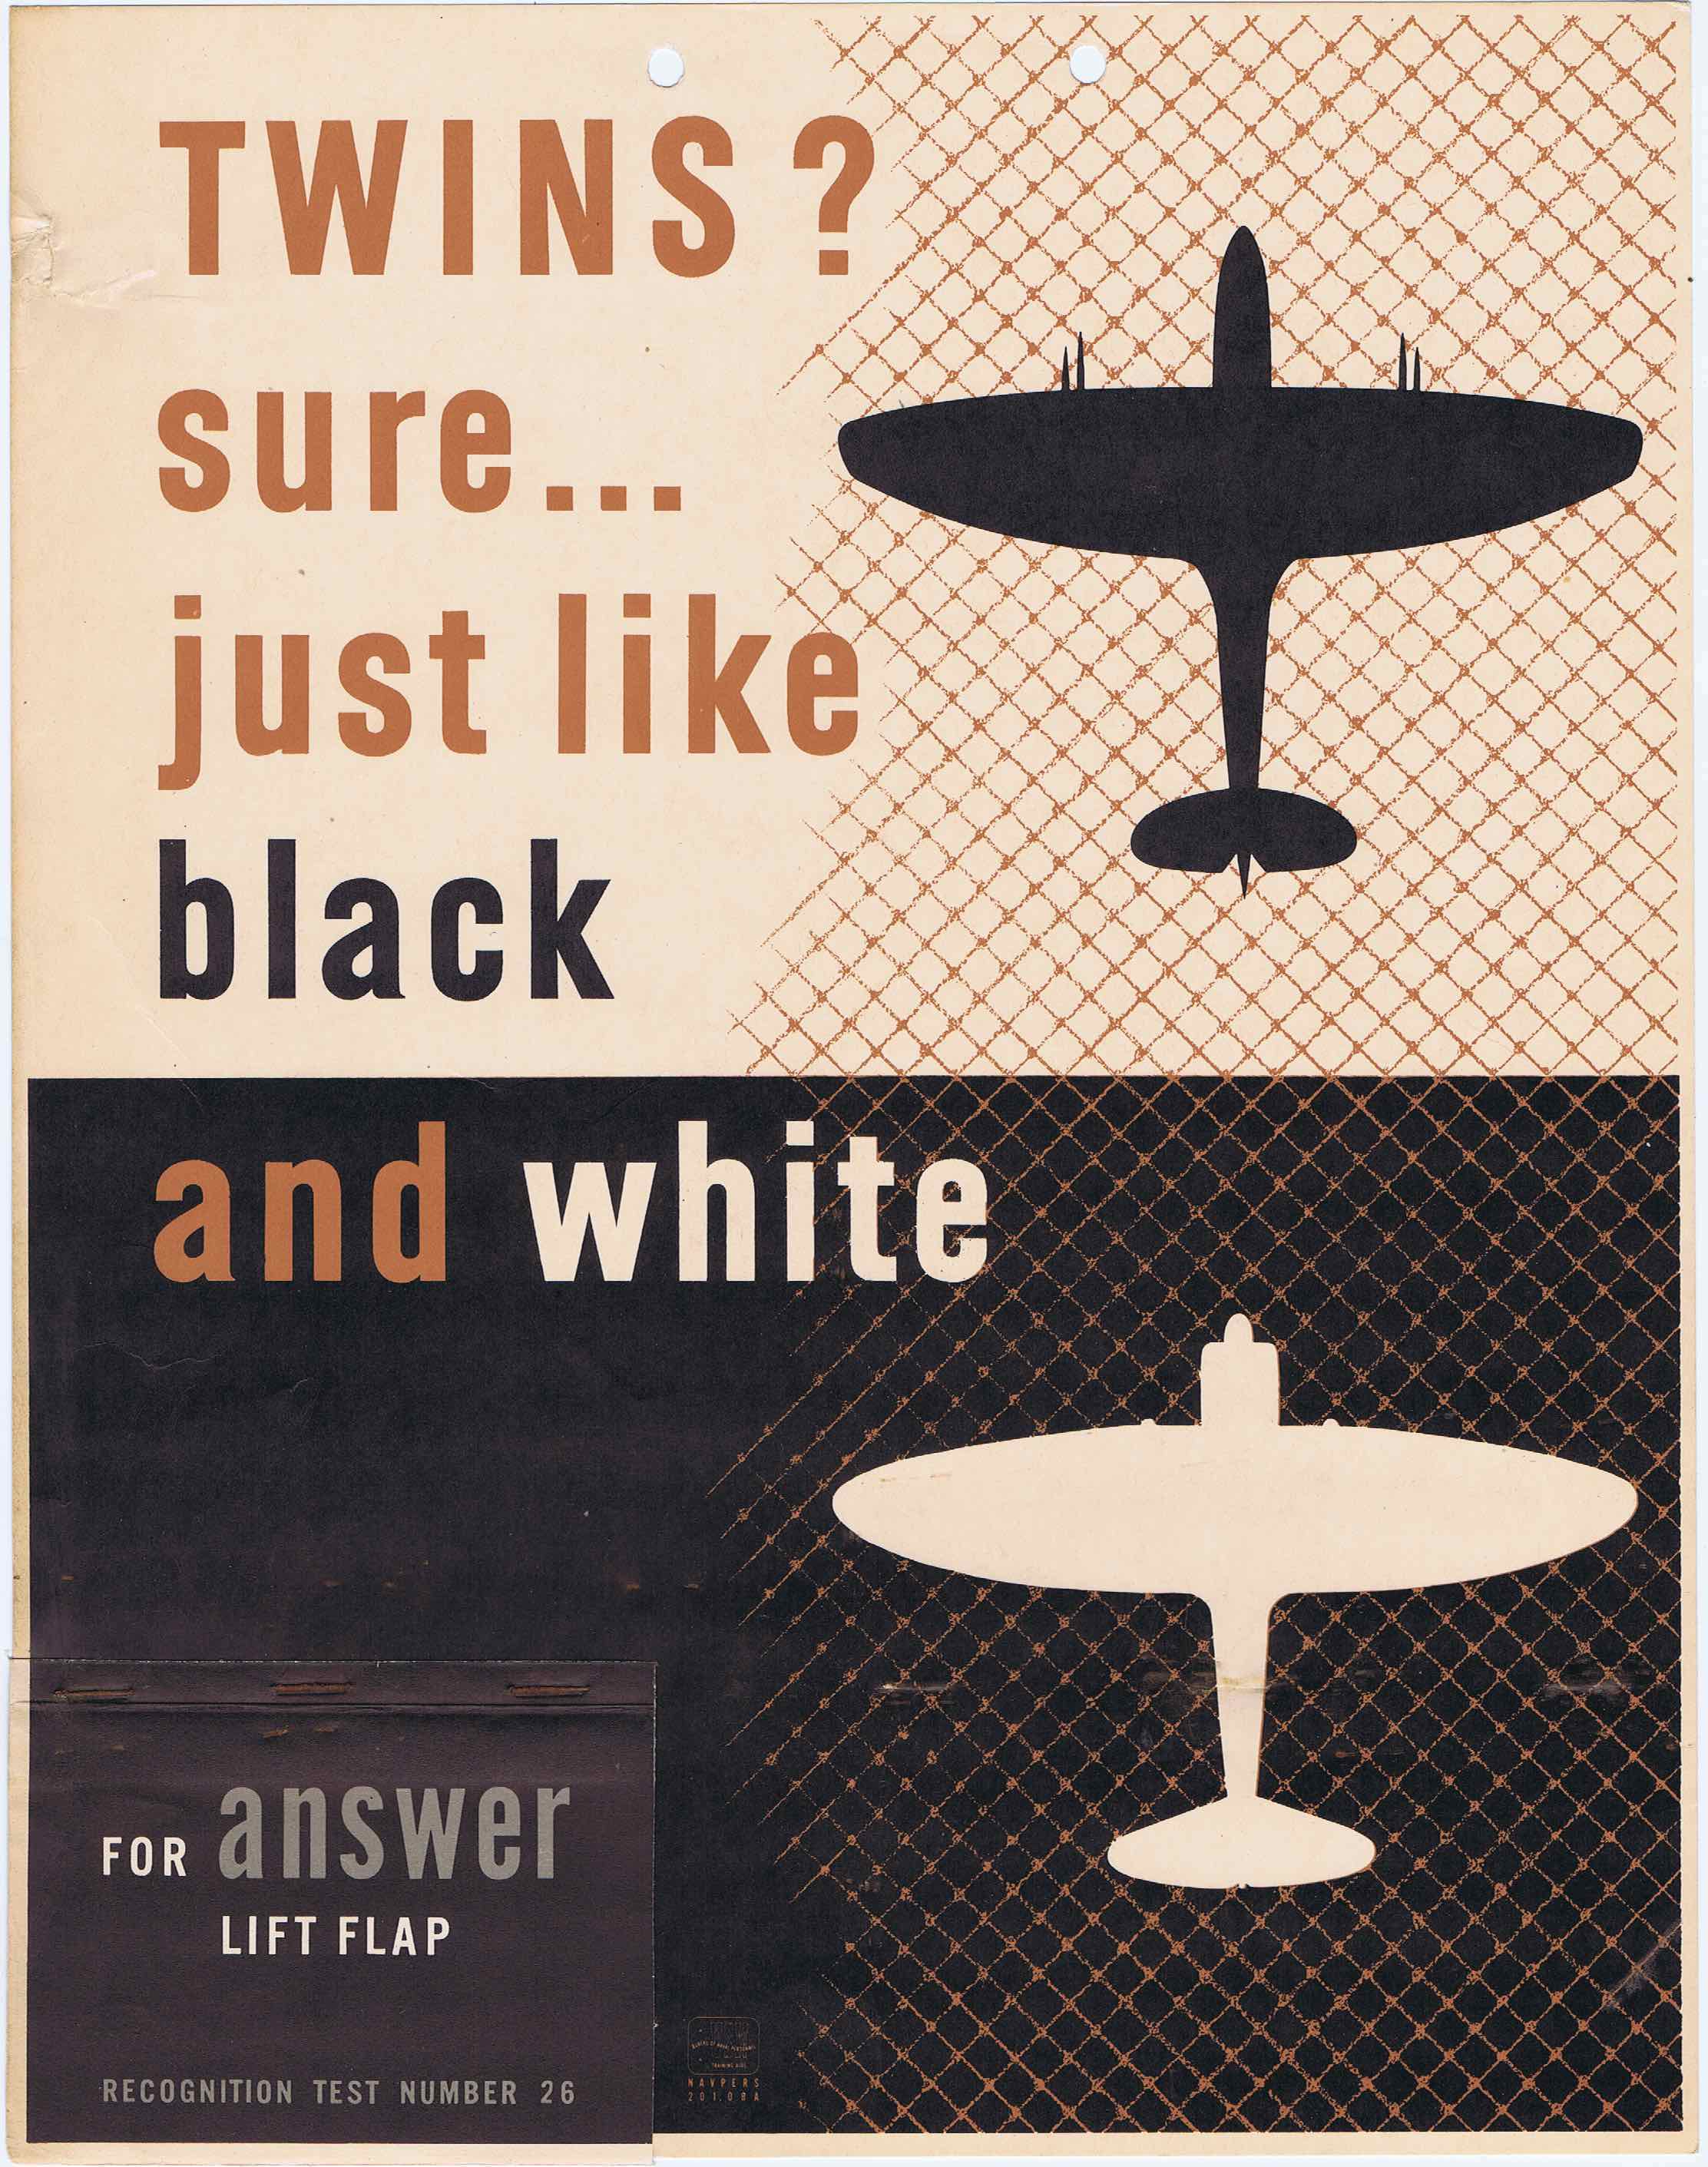 J312	TWINS? - SURE…JUST LIKE BLACK AND WHITE - U.S. ARMY AIR FORCE RECOGNITION POSTER